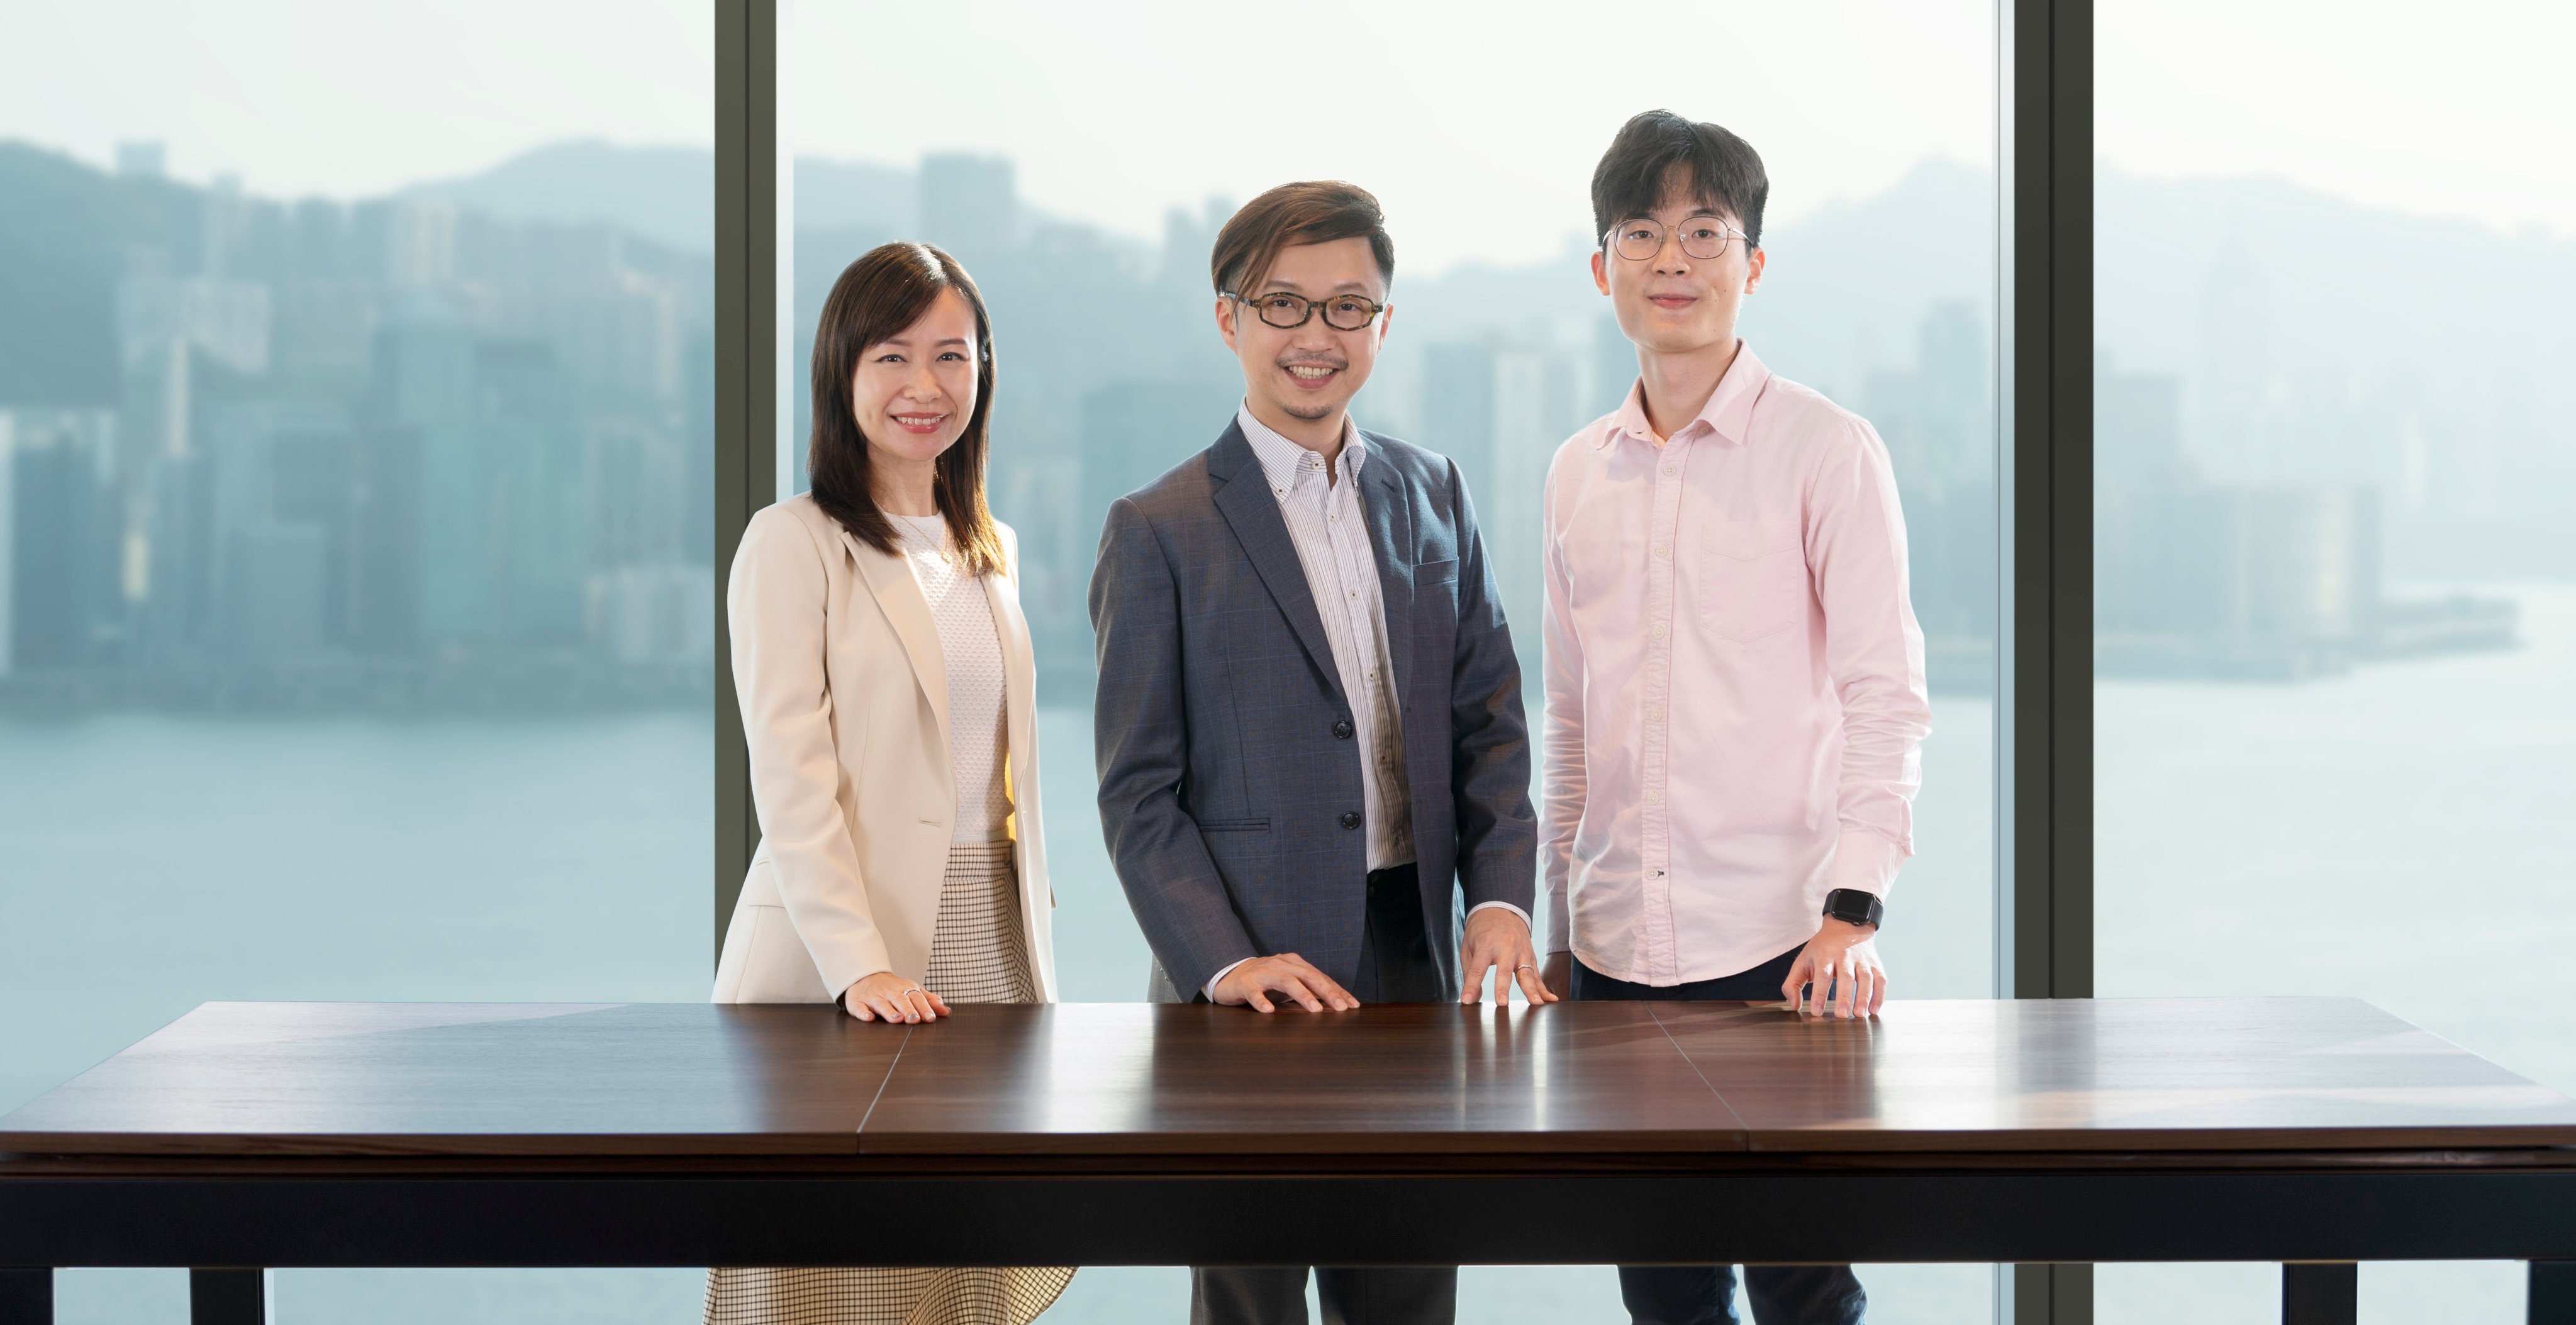 From left: Manulife Hong Kong’s wealth management manager Winvy Lung, actuary and chief product officer Danny Lee and advanced analytics specialist Alex Fung.